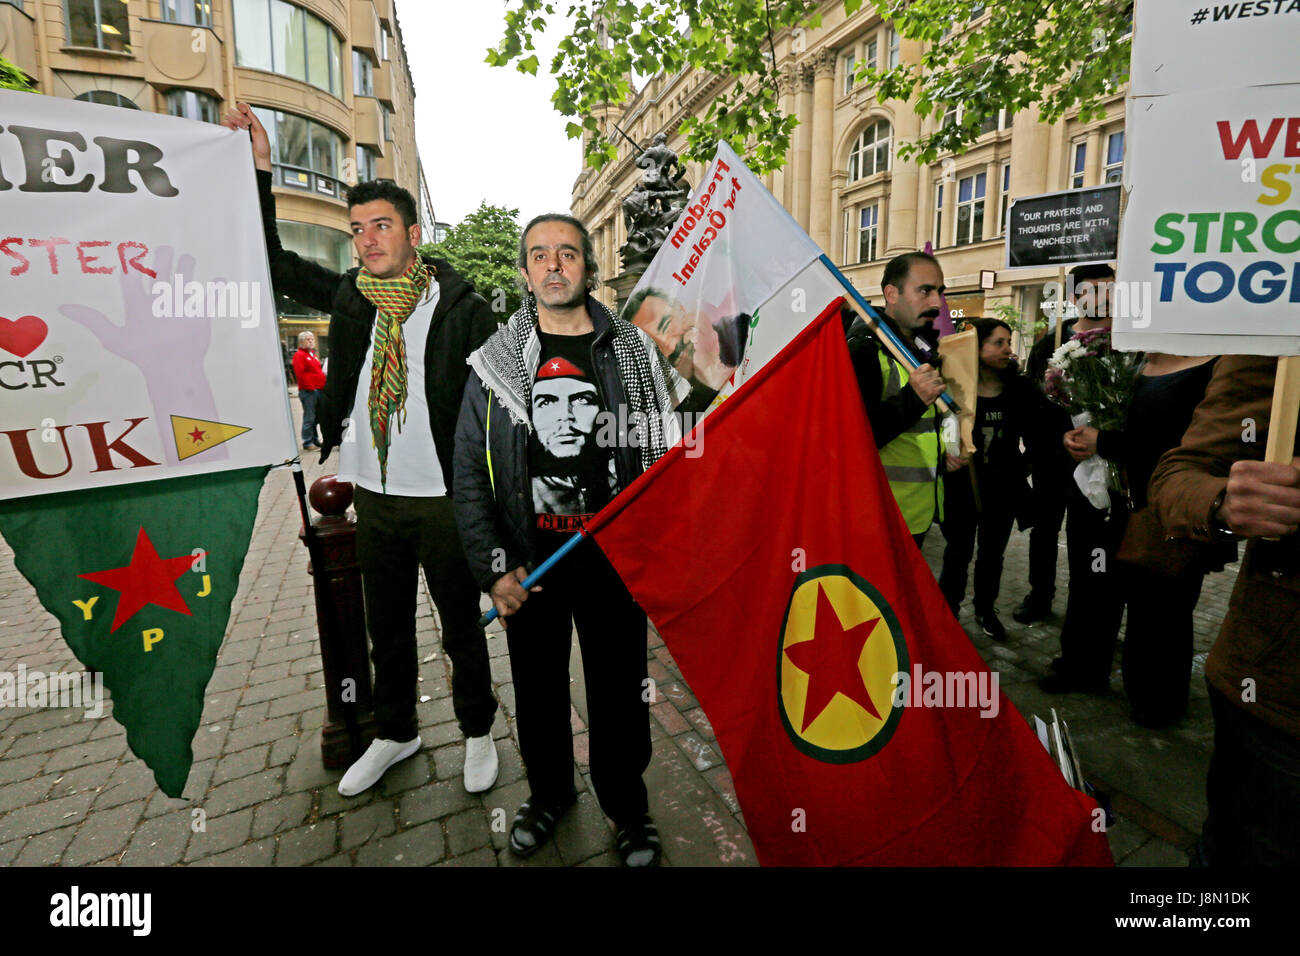 Manchester, UK. 29th May, 2017. Kurdish supporters of the YPJ, the armed forces of the Syrian region of Kurdistan, show support for victims of terror in St Anns Square, Manchester, 29th May, 2017 Credit: Barbara Cook/Alamy Live News Stock Photo